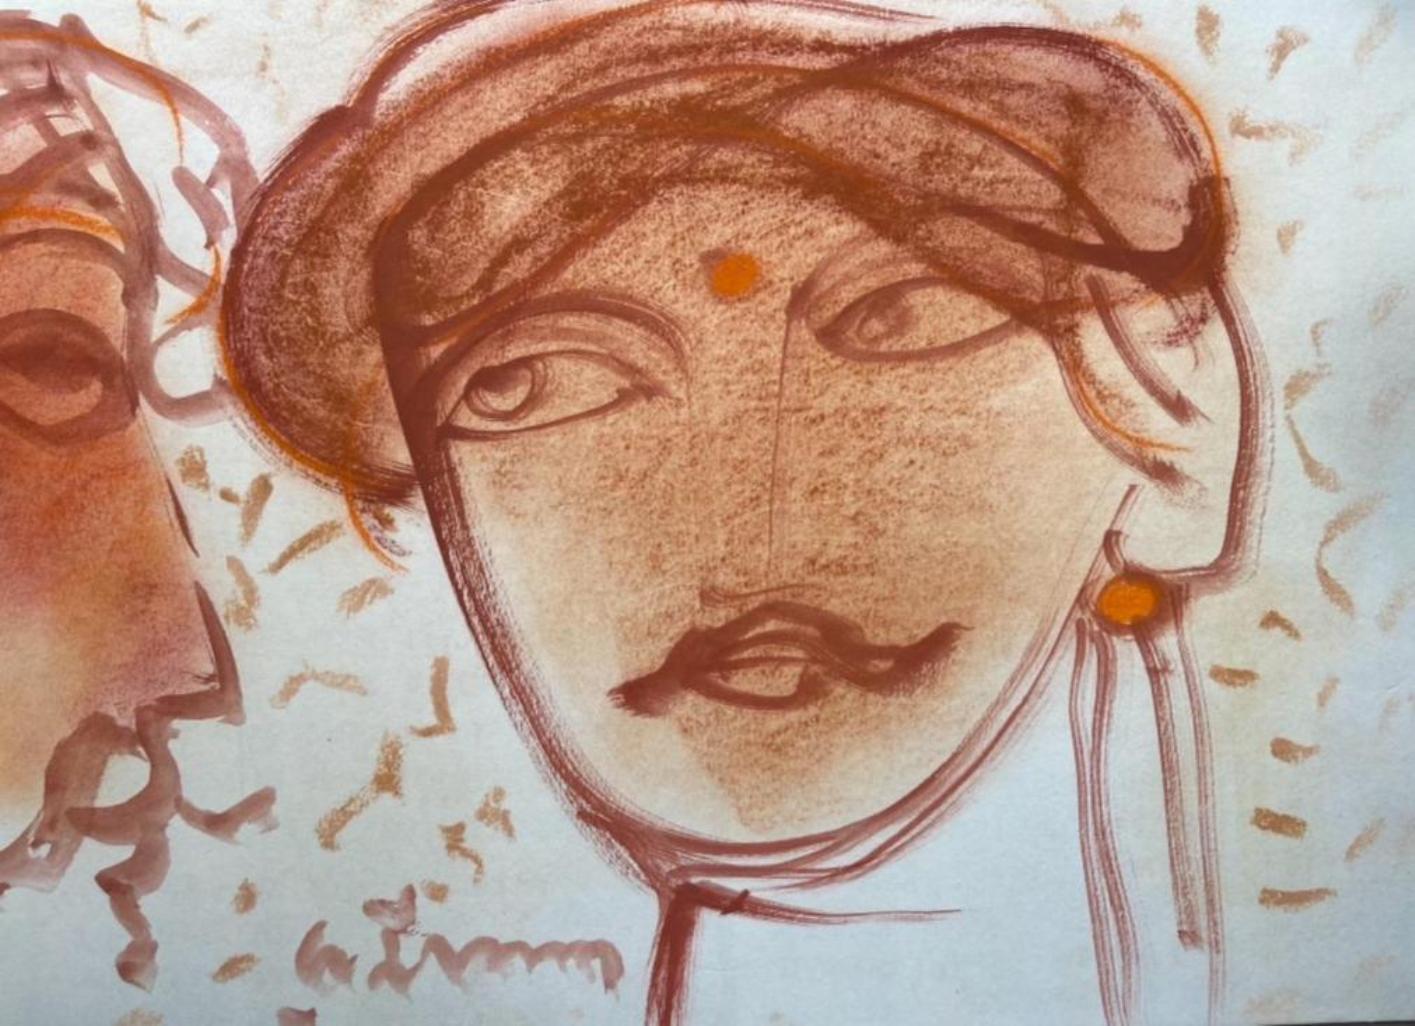 Untitled, Pastel & Ink on Paper, by Modern Indian Artist "In Stock" - Mixed Media Art by Ramananda Bandopadhayay